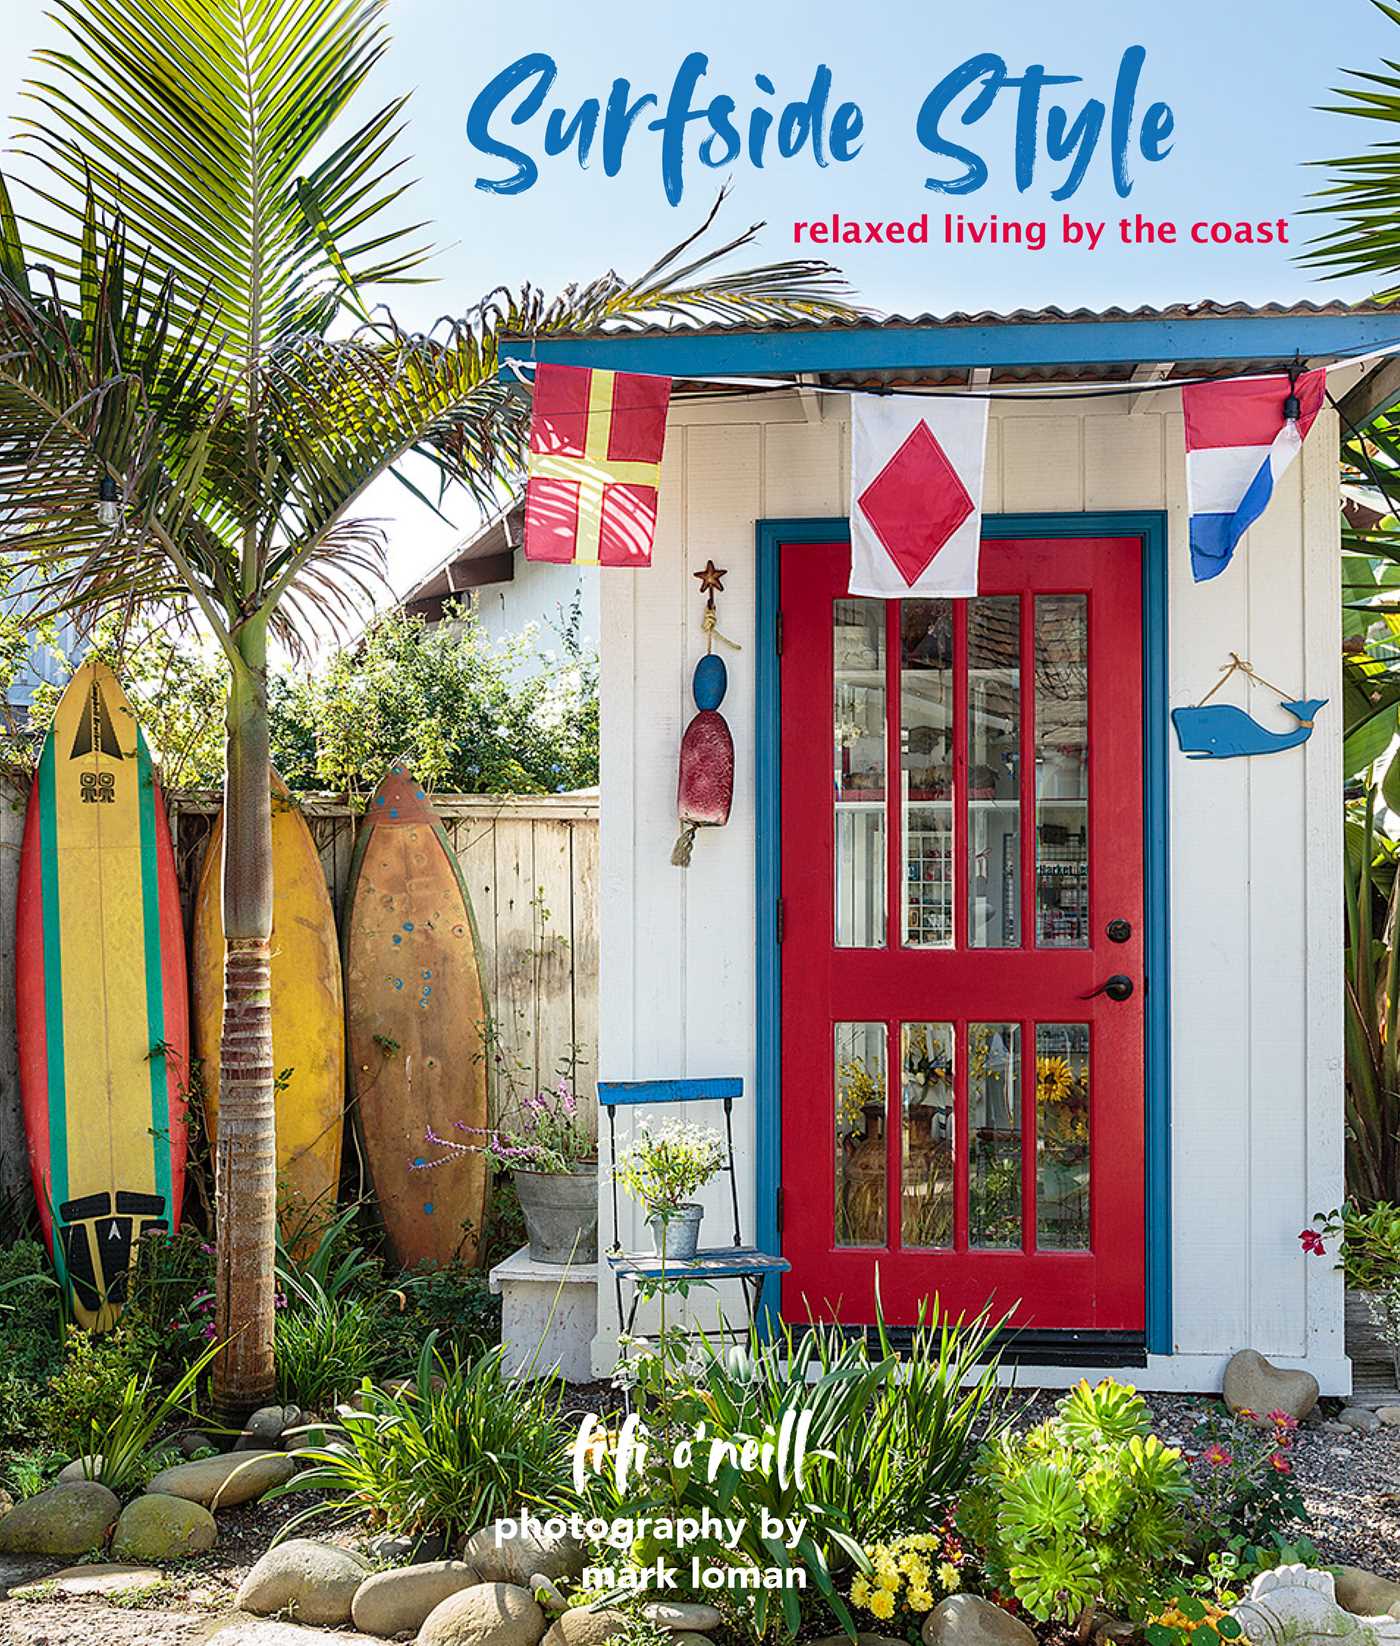 SURFSIDE STYLE: RELAXED LIVING BY THE COAST